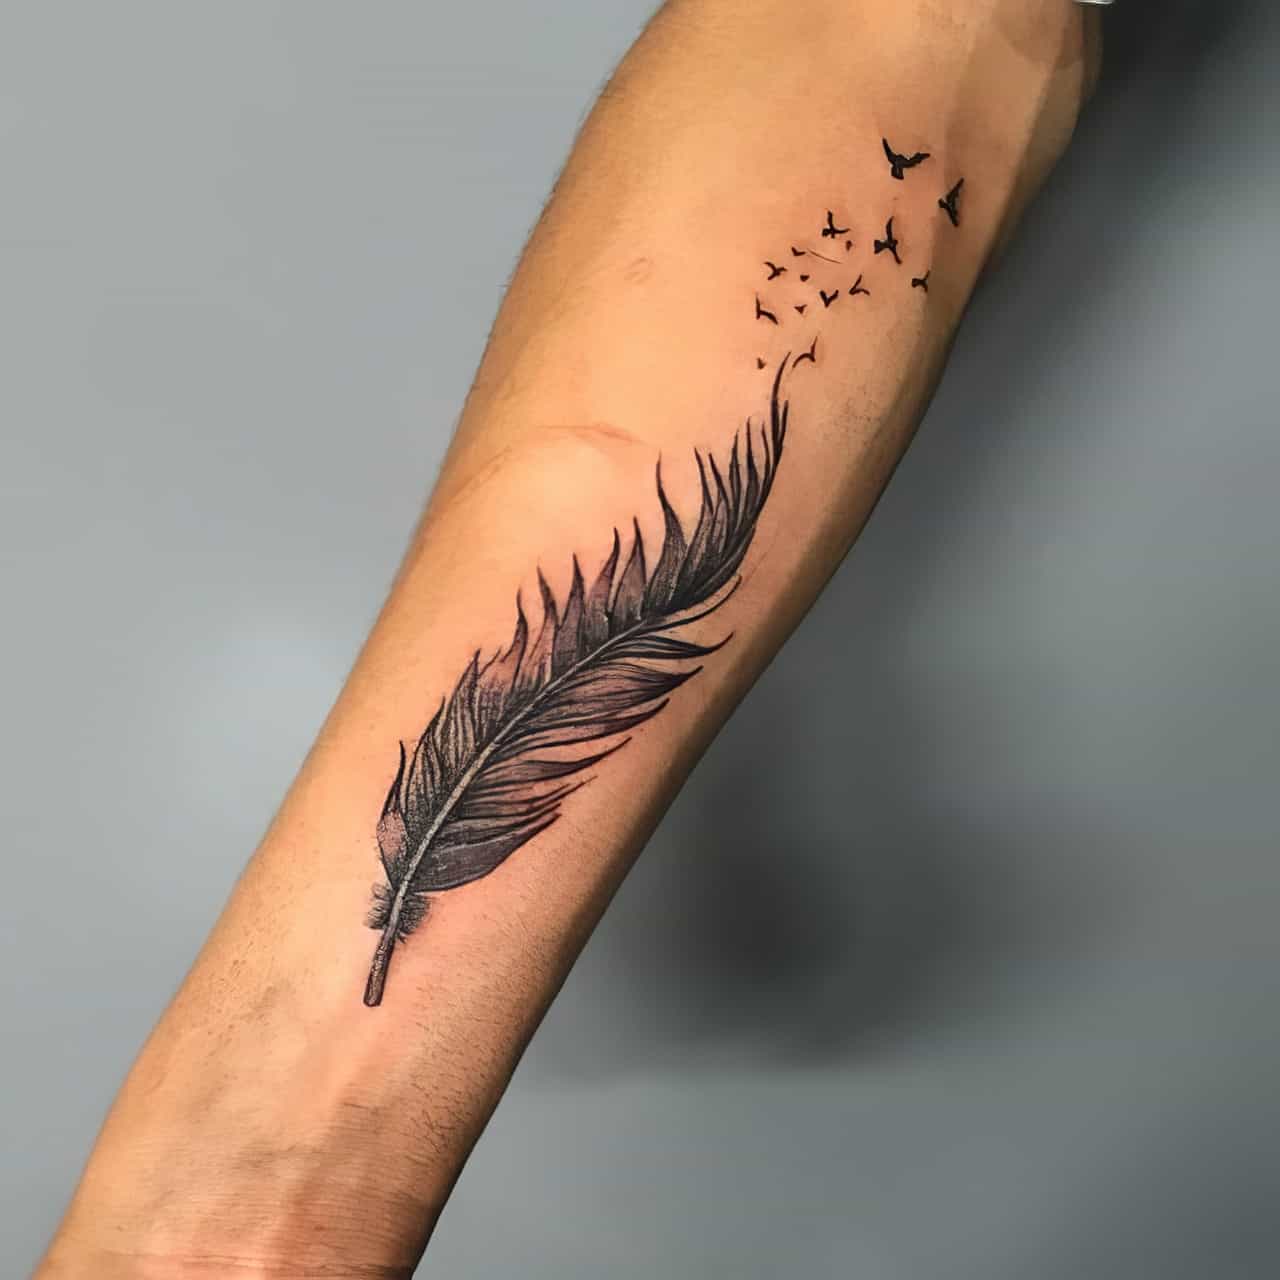 Feather tattoo on the left forearm.